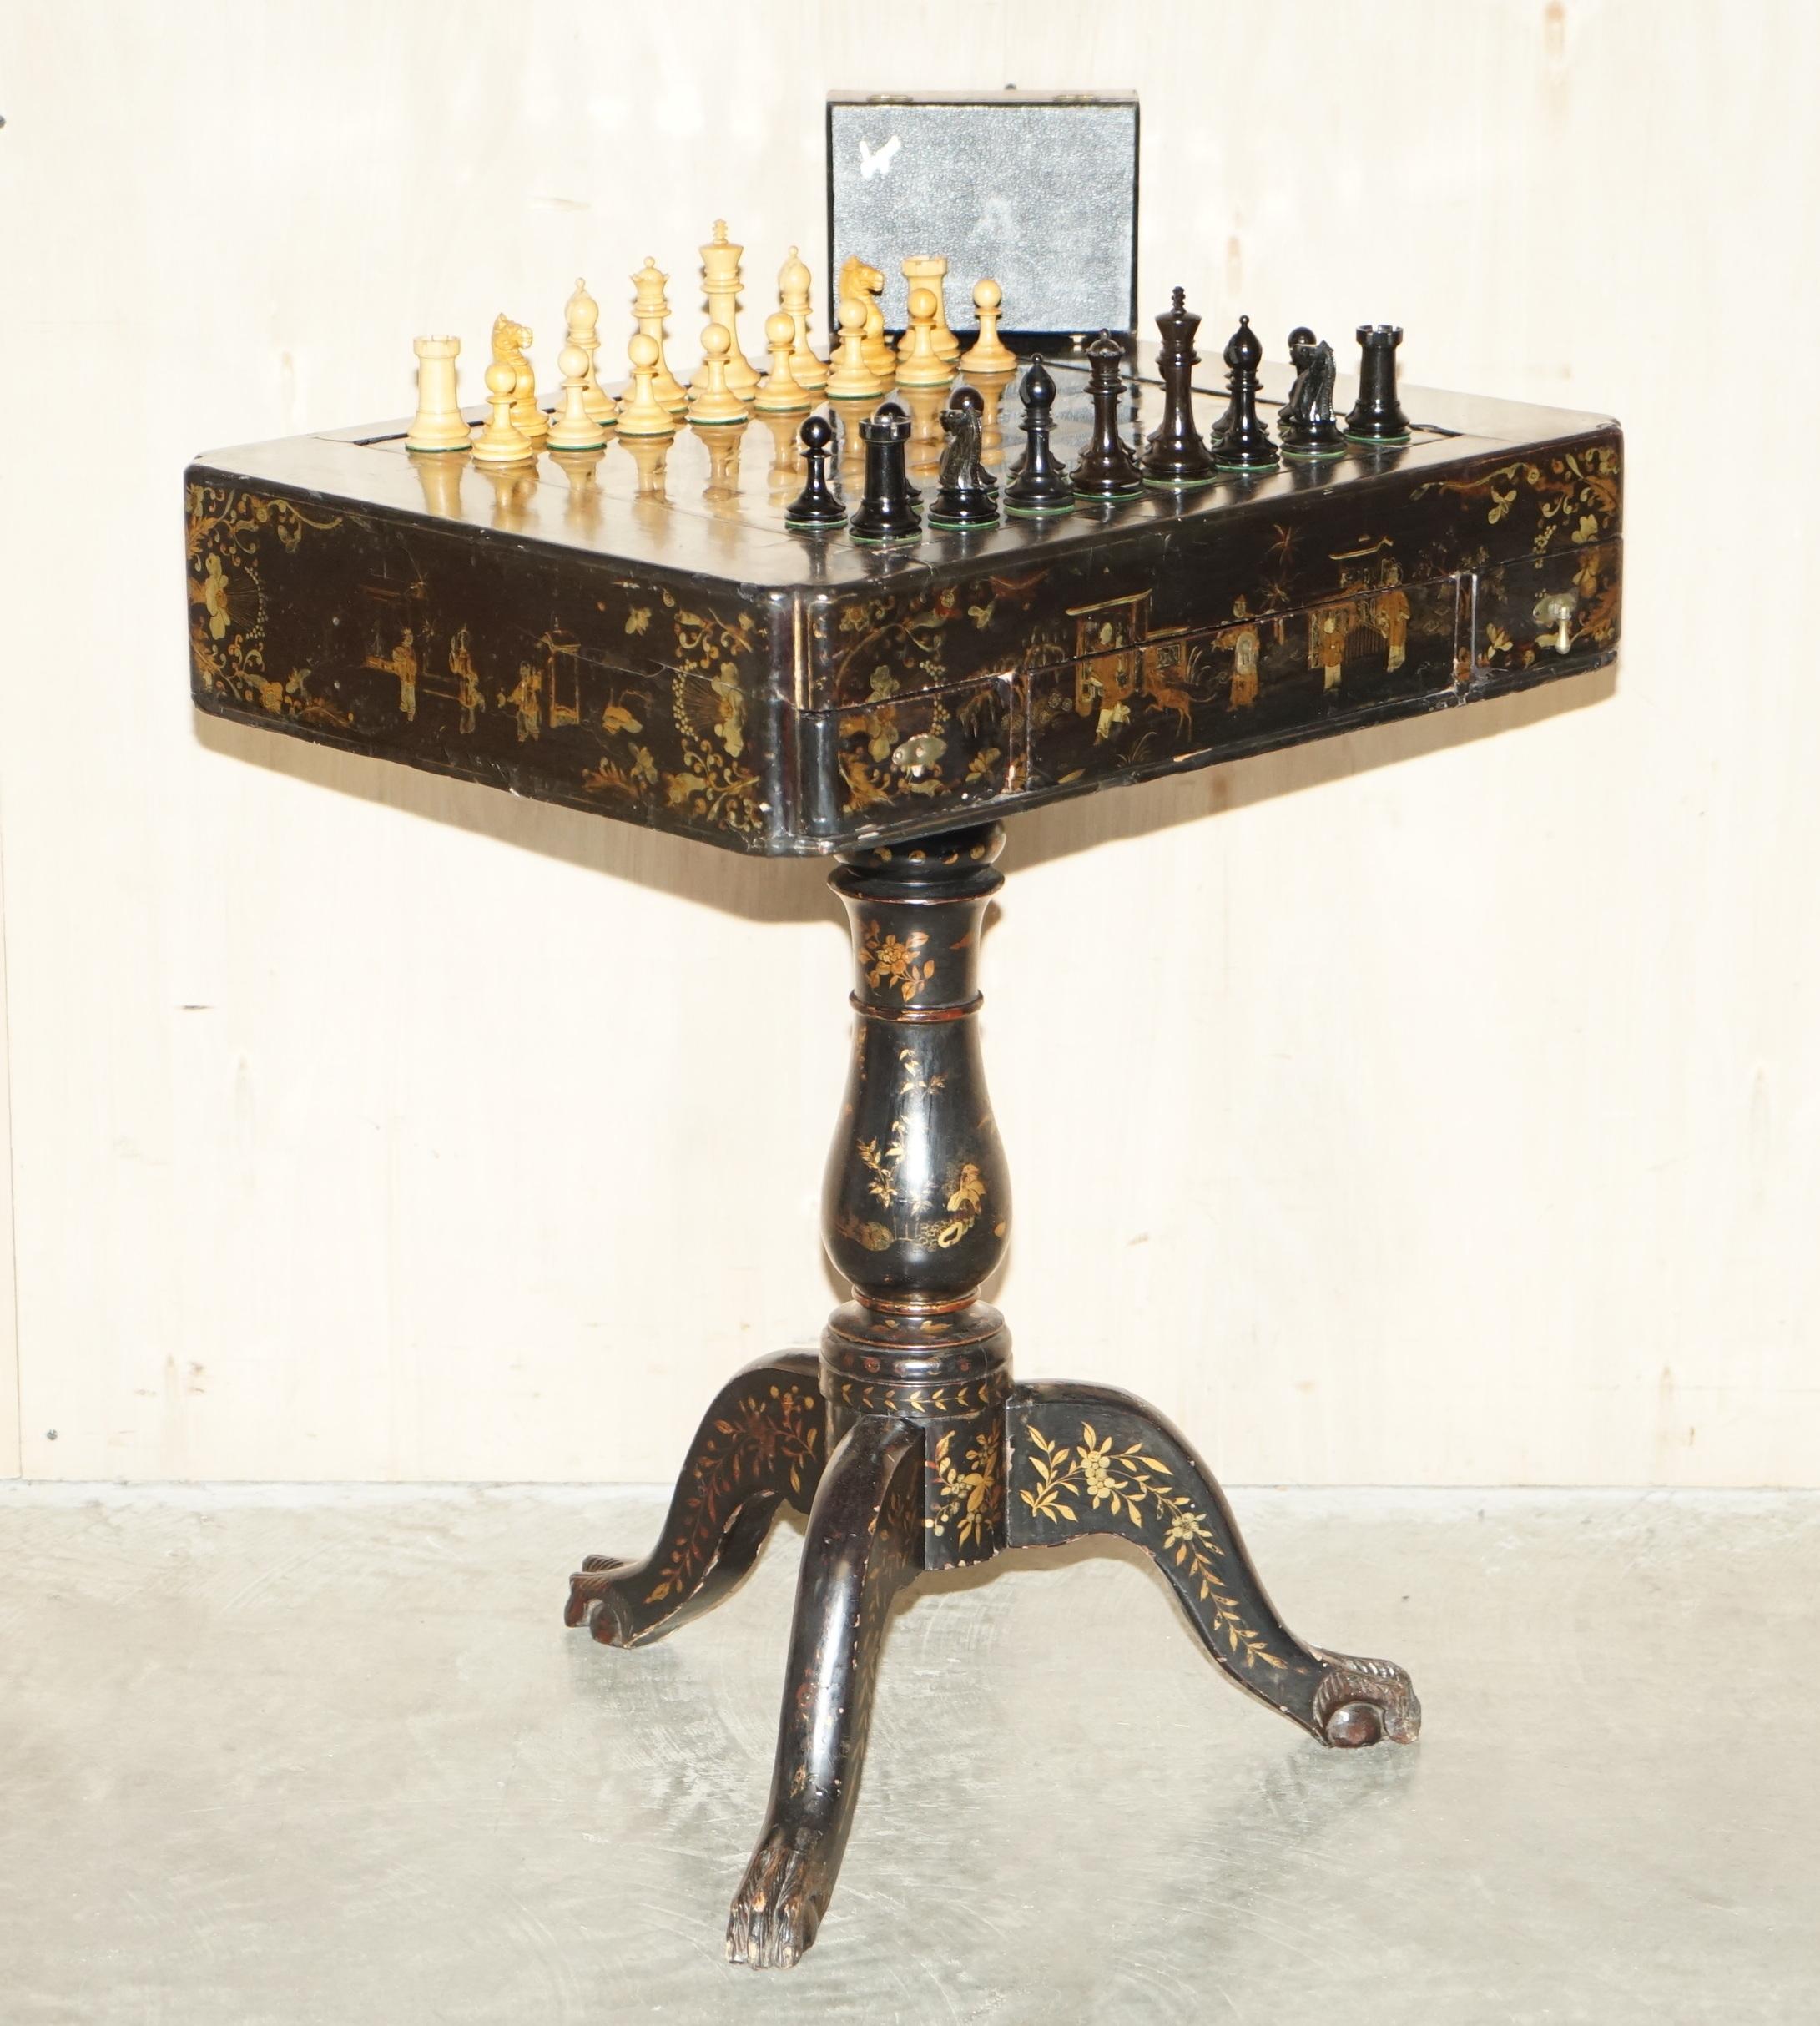 Royal House Antiques

Royal House Antiques is delighted to offer for sale this extremely rare original fully restored Victorian Jaques London Staunton weighted chess set

PLEASE NOTE THE CHINESE CHINOISERIE TABLE IS NOT INCLUDED IN THIS LISTING BUT